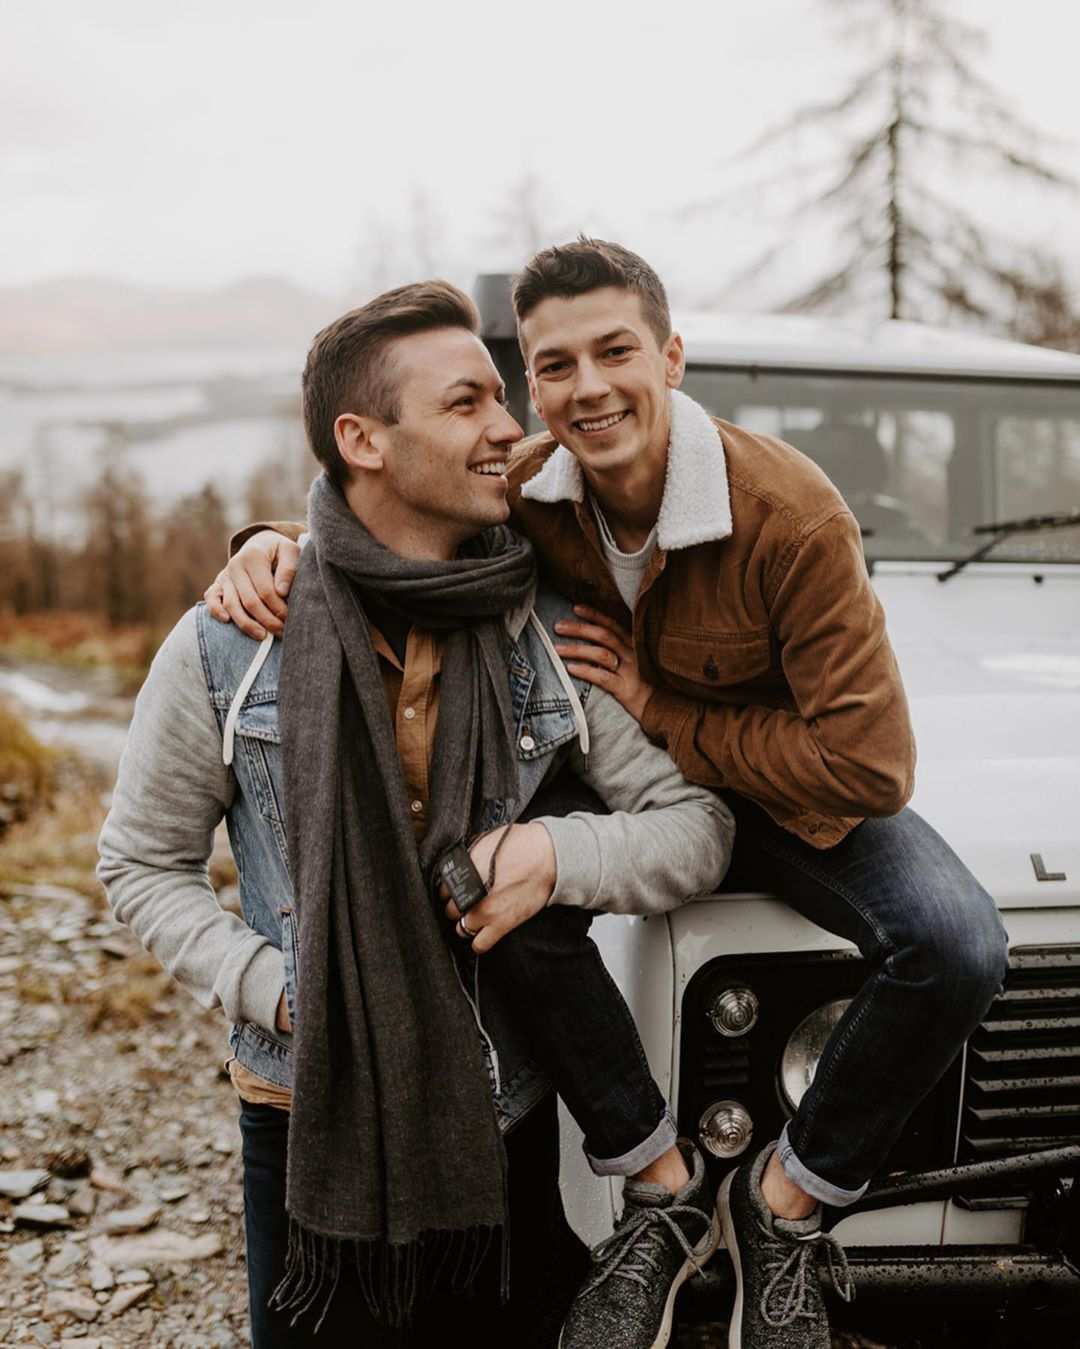 Michael and Matt are a cute gay couple from Oregon who post inspiring photography from their travels and everyday life